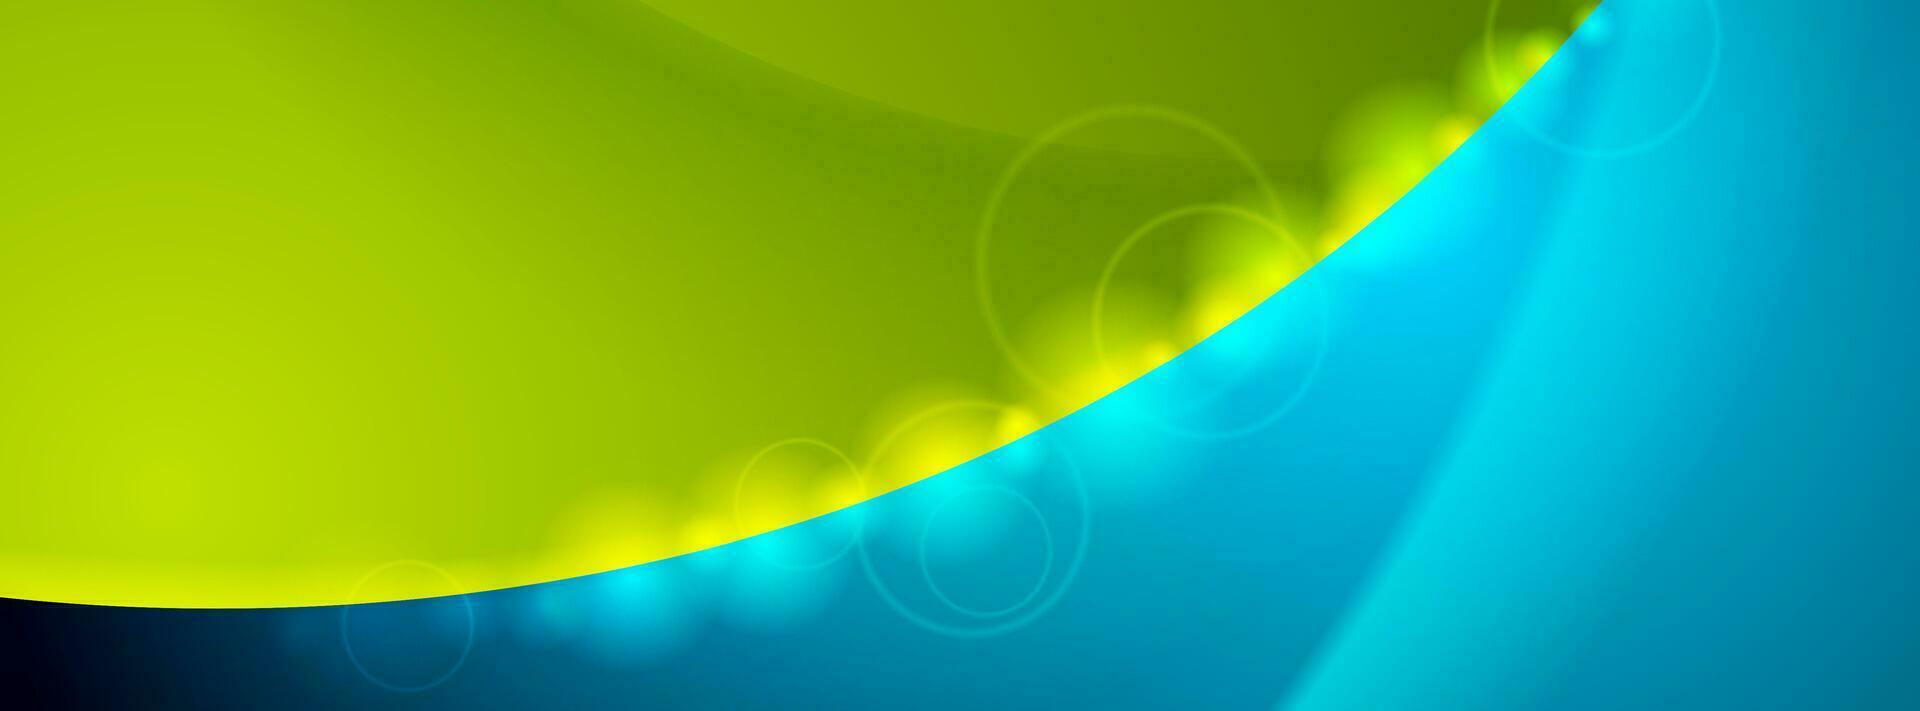 Blue green abstract shiny waves background vector